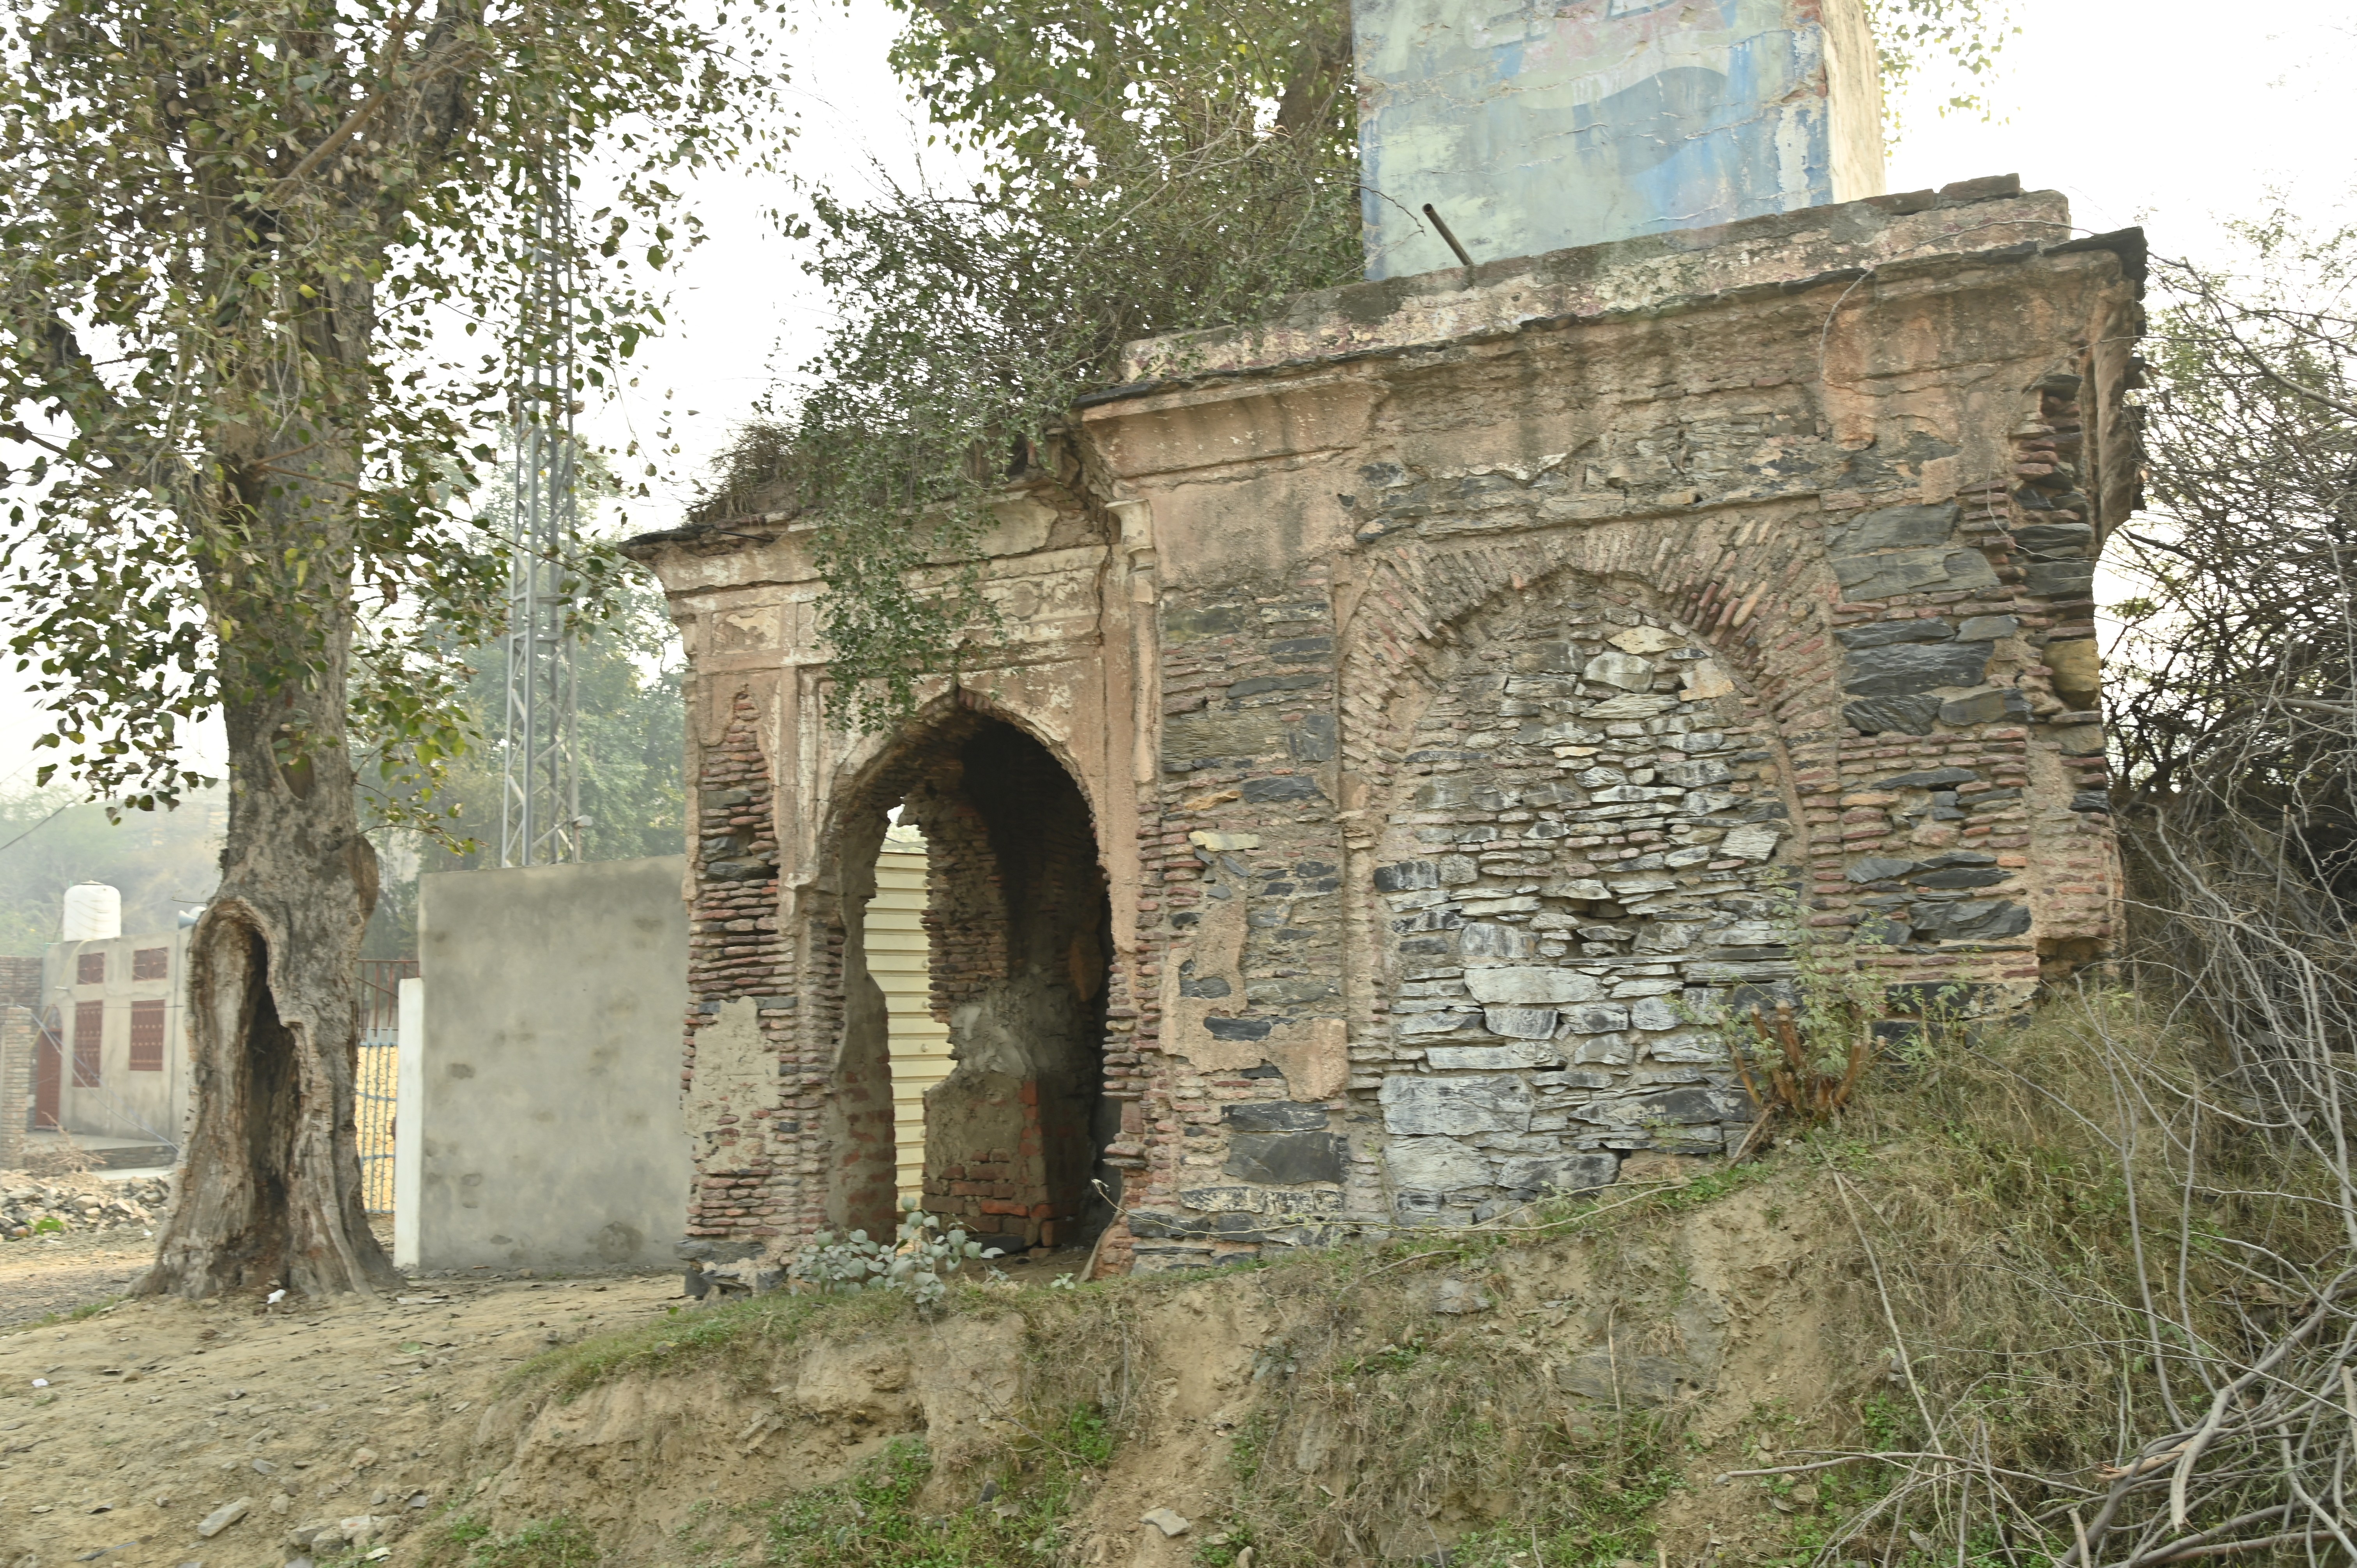 The deteriorated and crumbling beauty of the ancient structure near The Attock Tomb